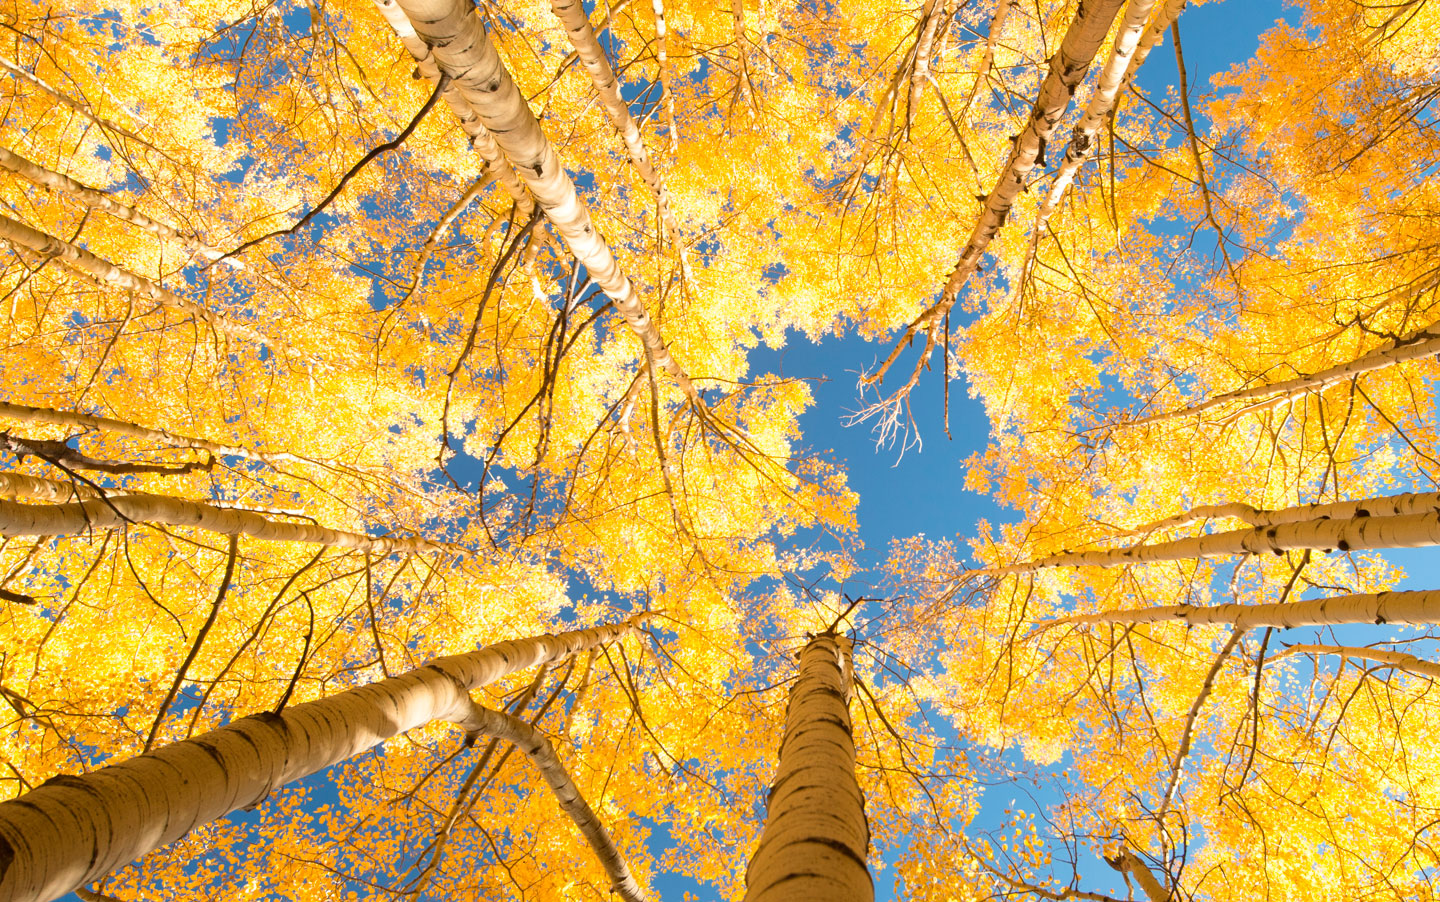 Looking up at the sky through aspen trees with yellow leaves